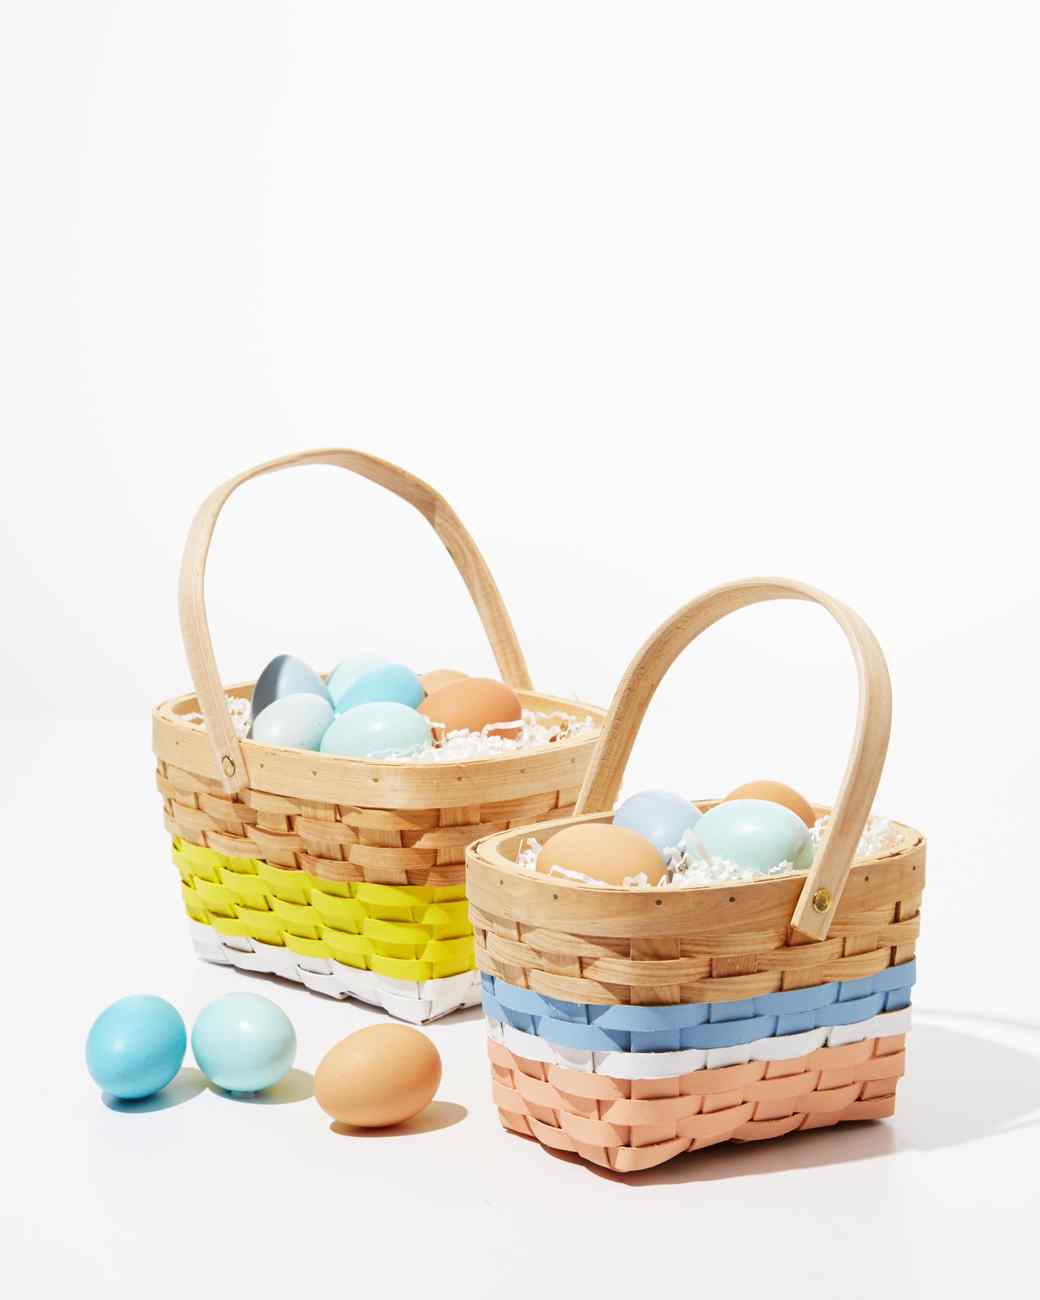 Pictures Of Easter Baskets 29